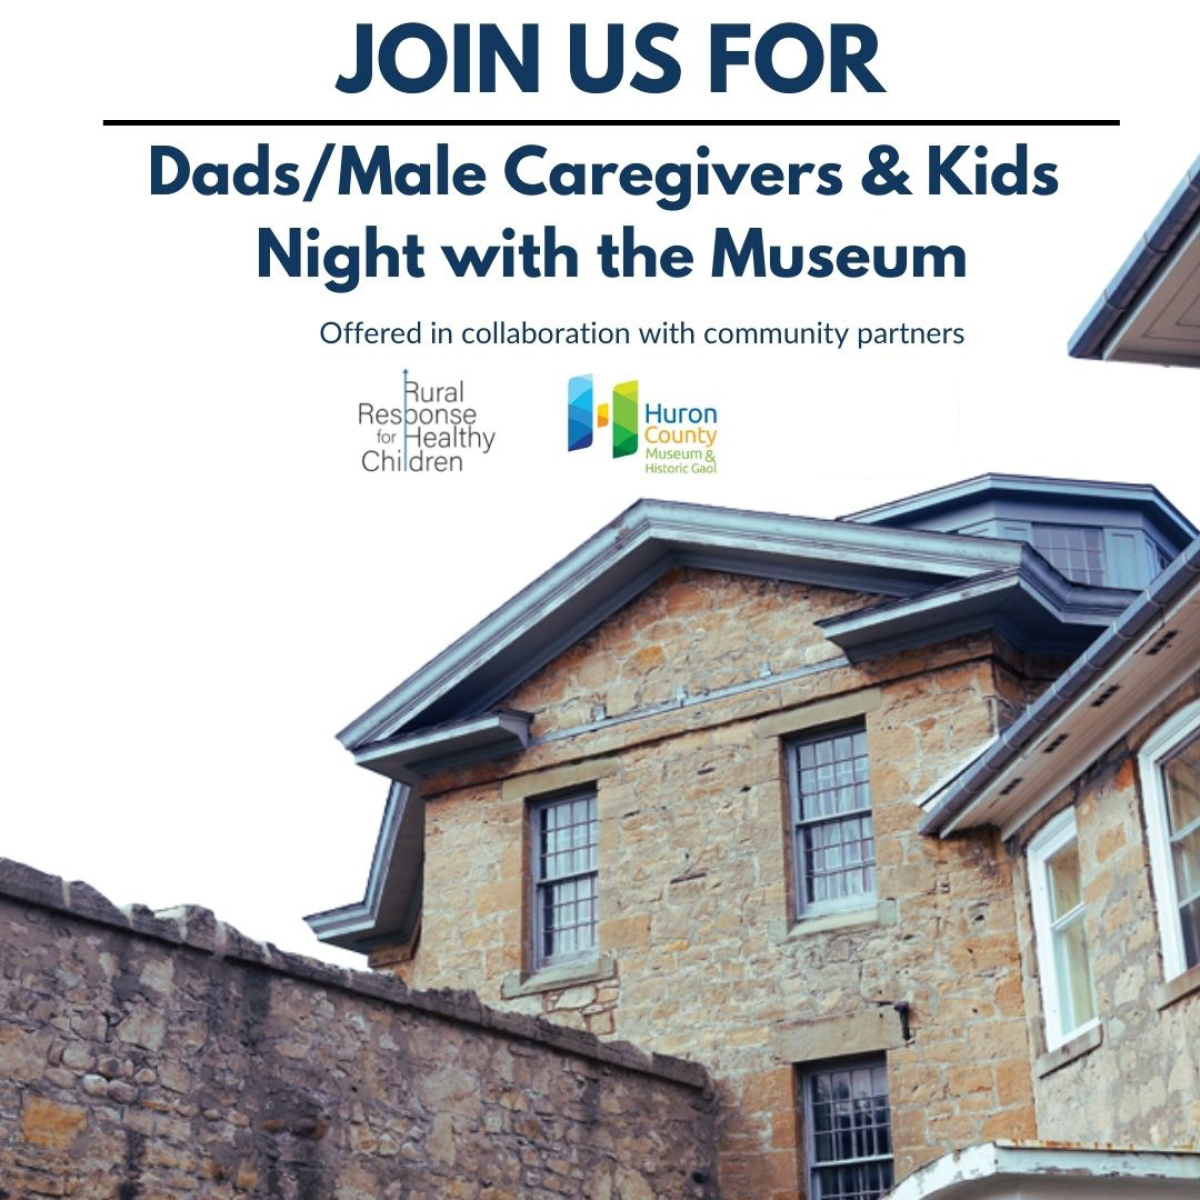 Image of the Huron Historic Gaol with text promoting Dads & Kids night at the museum